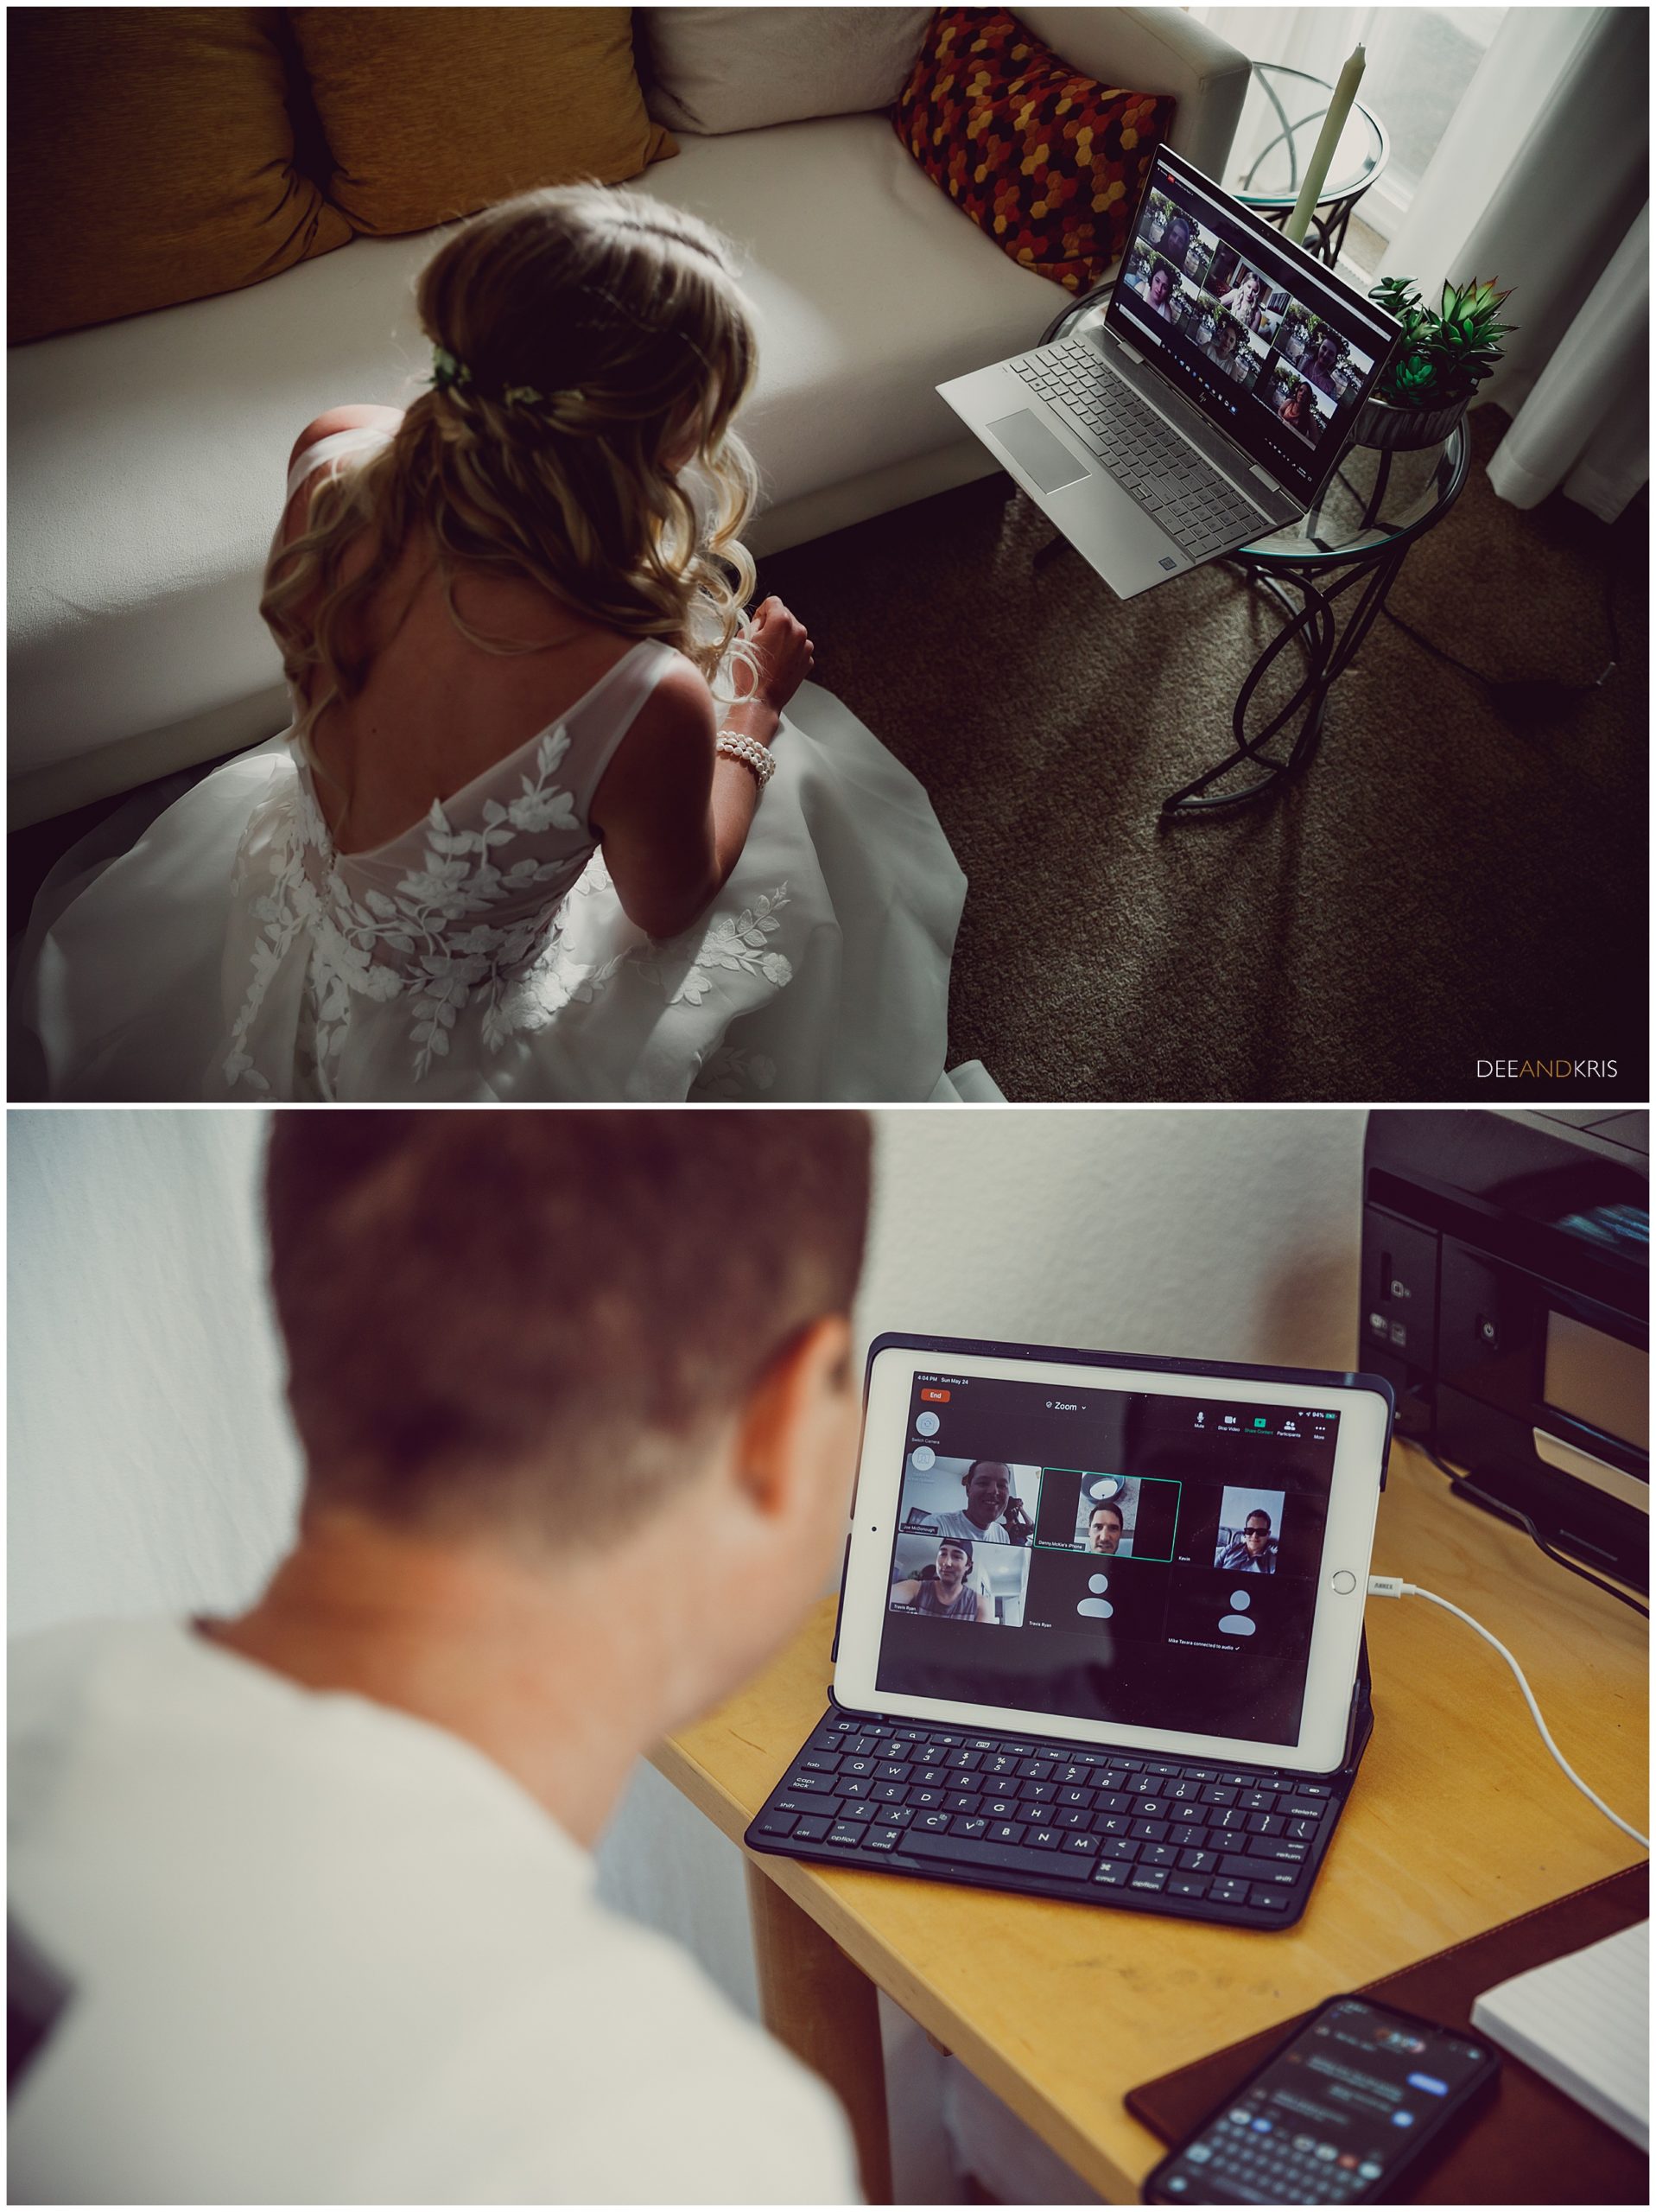 Corona Virus elopement ideas, Bride and Groom video chat with their bridal party